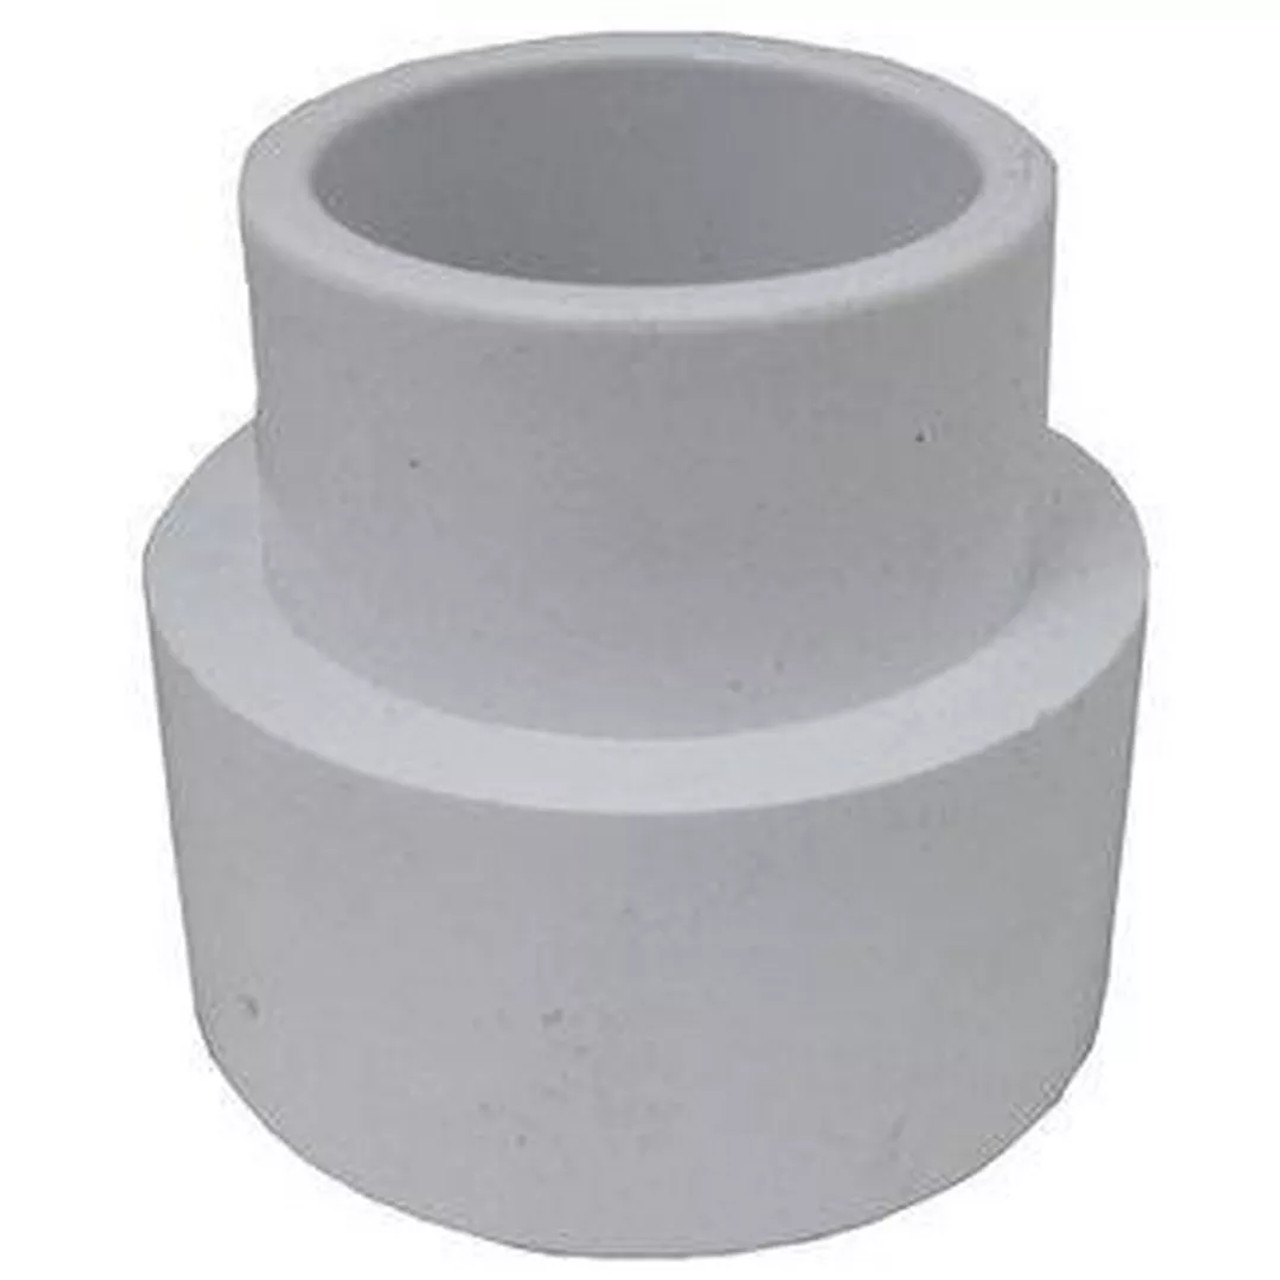 2", PVC, Pipe, Extender, Fitting, schedule, sch, 40, SP0301-20, 21182-200-000, 21181-200, 2-PACK, 429-2010 , 0303-20 , 230276, 7272A , SPG-56-0071 , WW4292010B , WWP-56-4532, CMP, Custom Molded Products, swimming, Pool, 849640000649